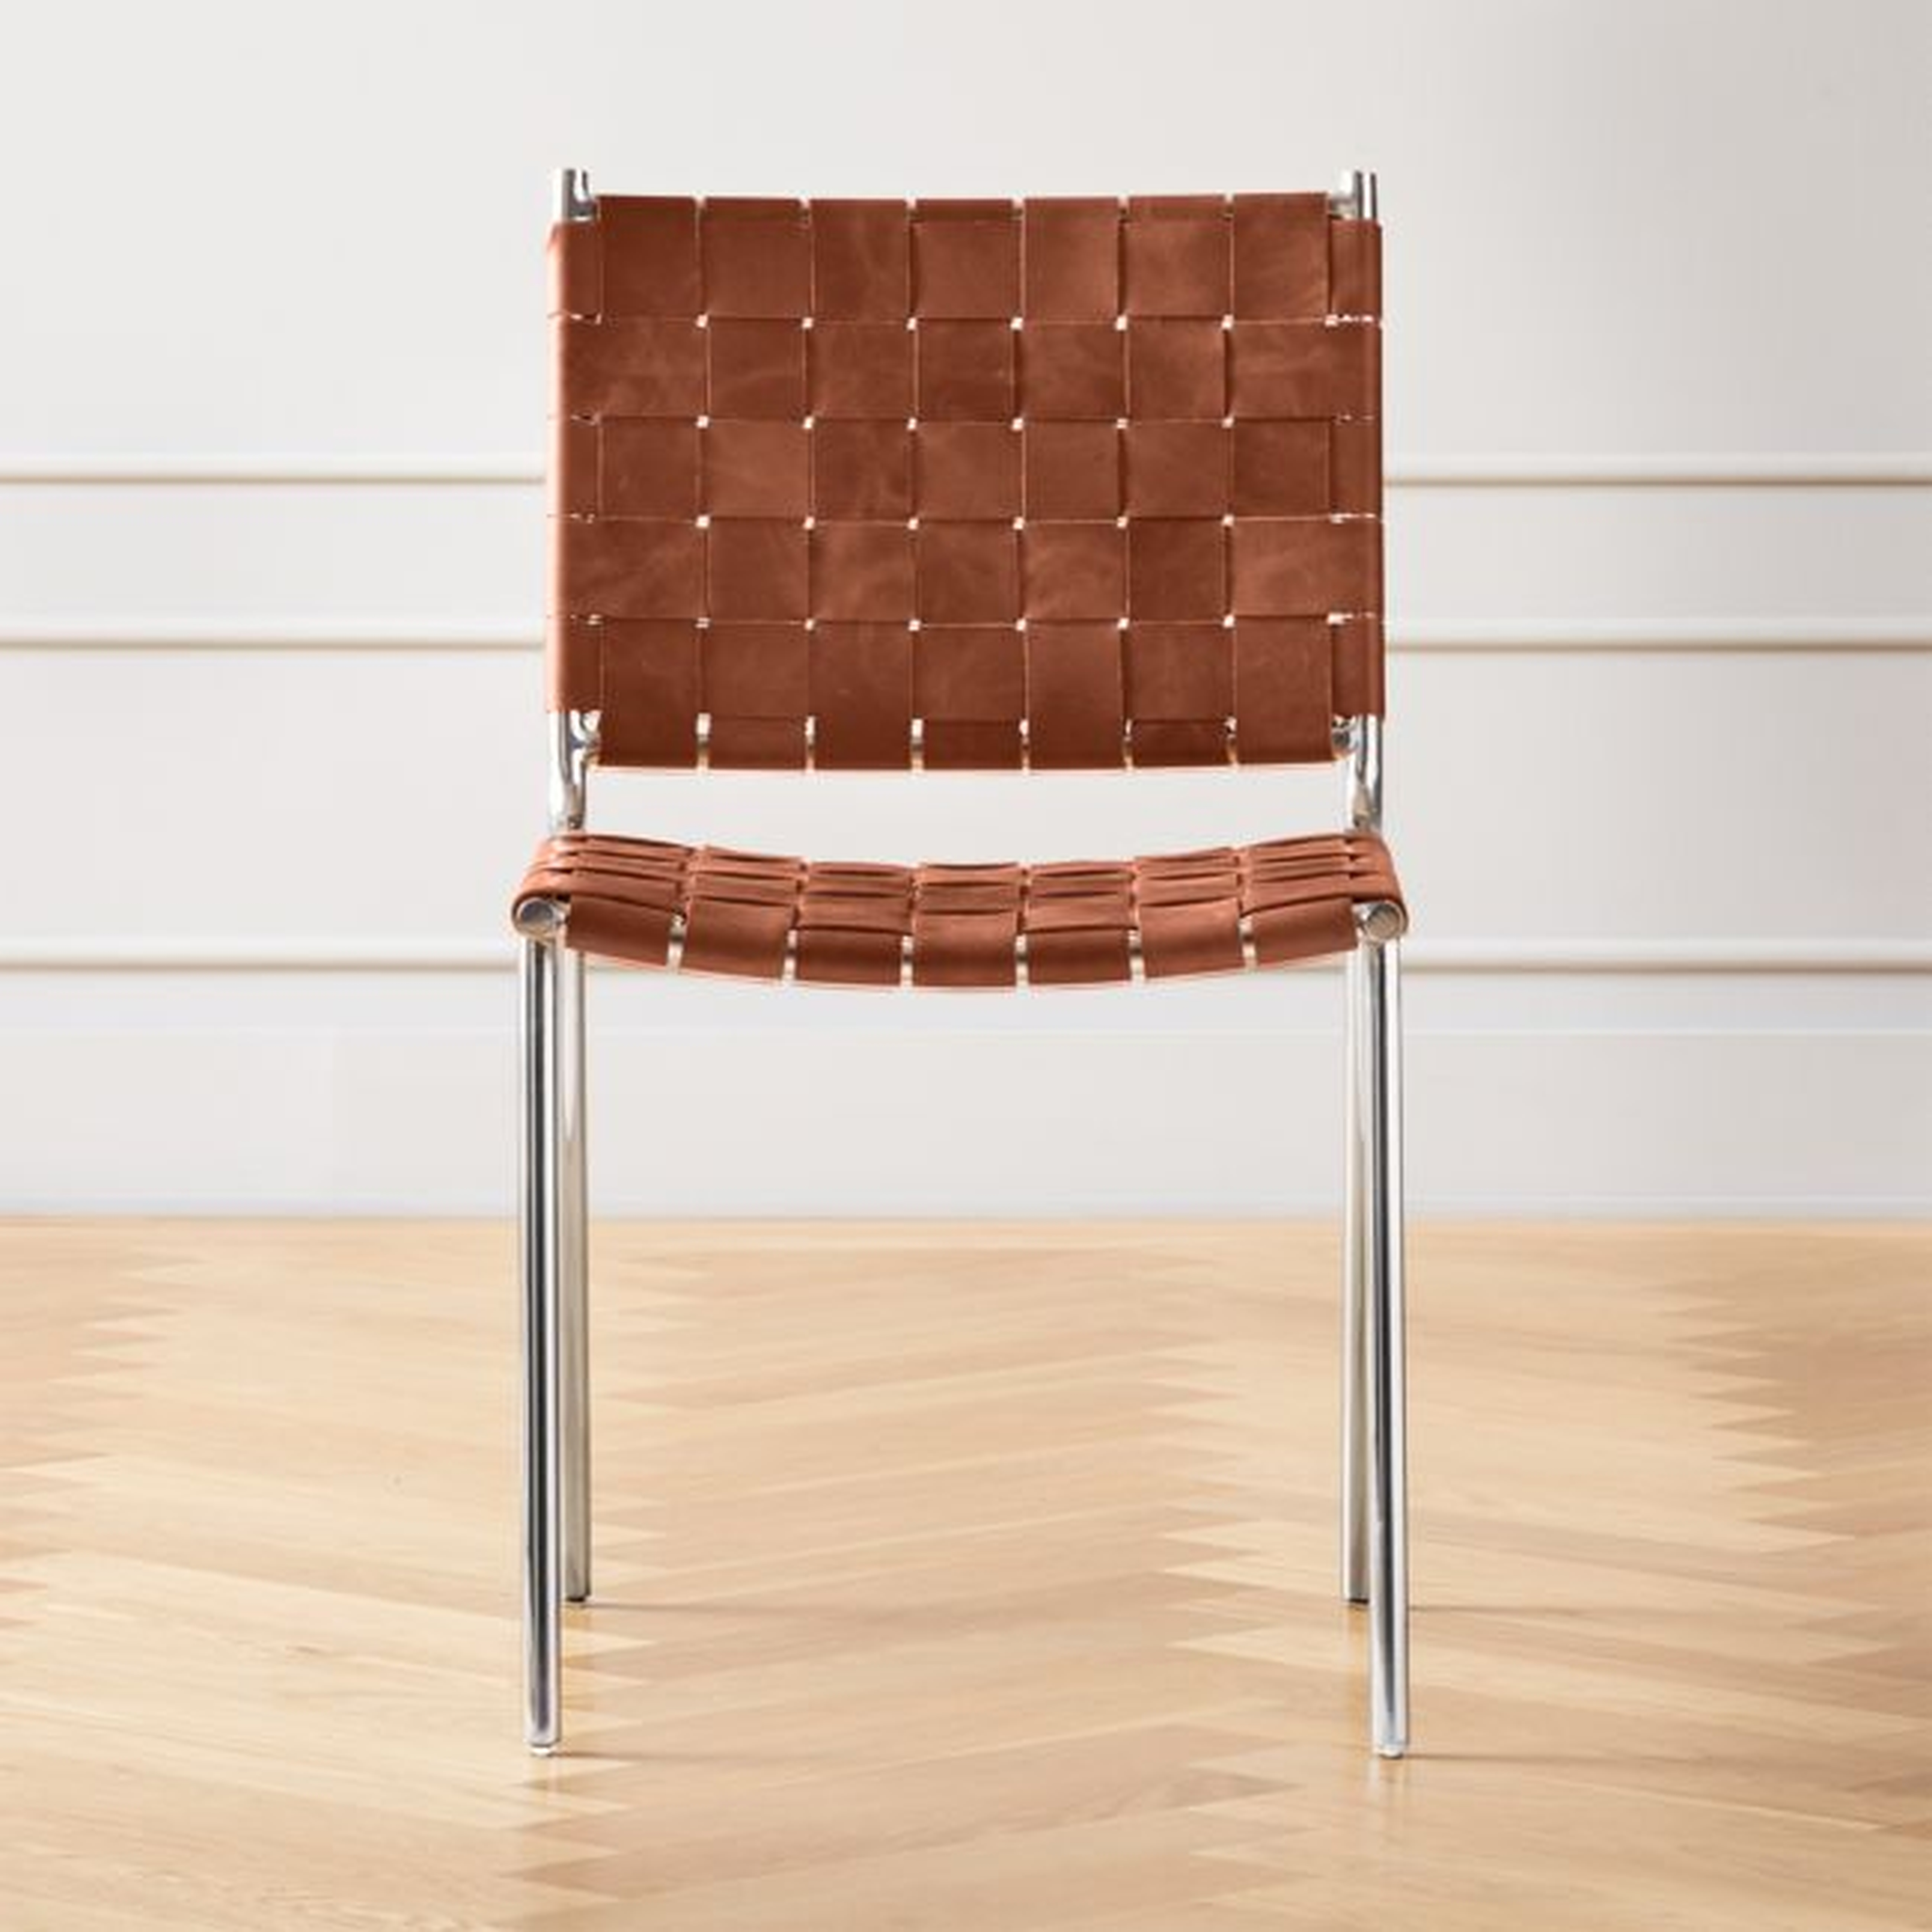 Woven Brown Leather Chair - CB2